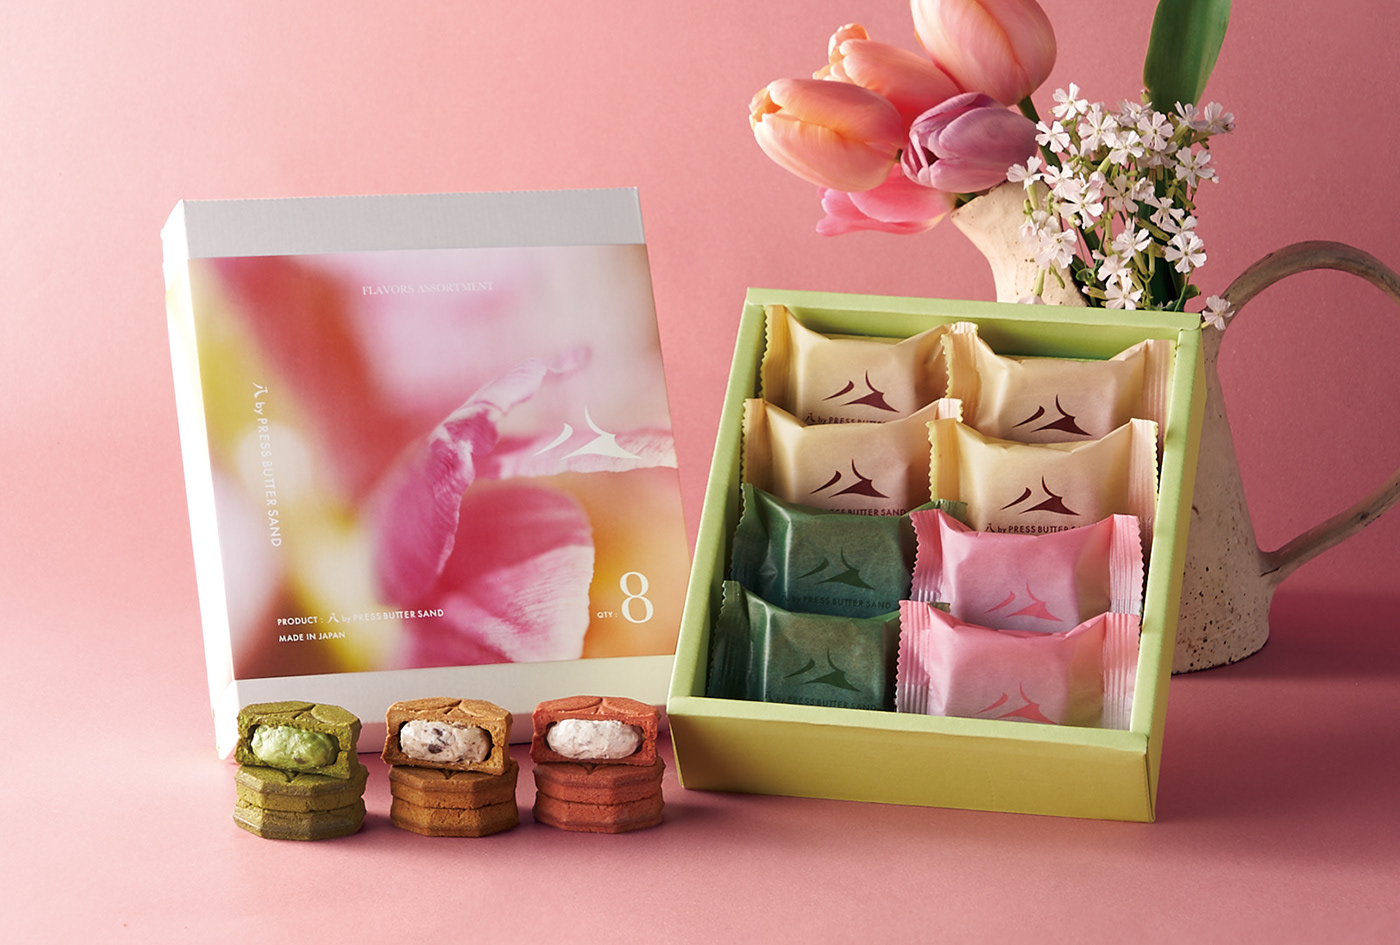 graphic design  Greentea japanese mothers day packaging design Photography  press butter sand Sweets ArtDirection sakura